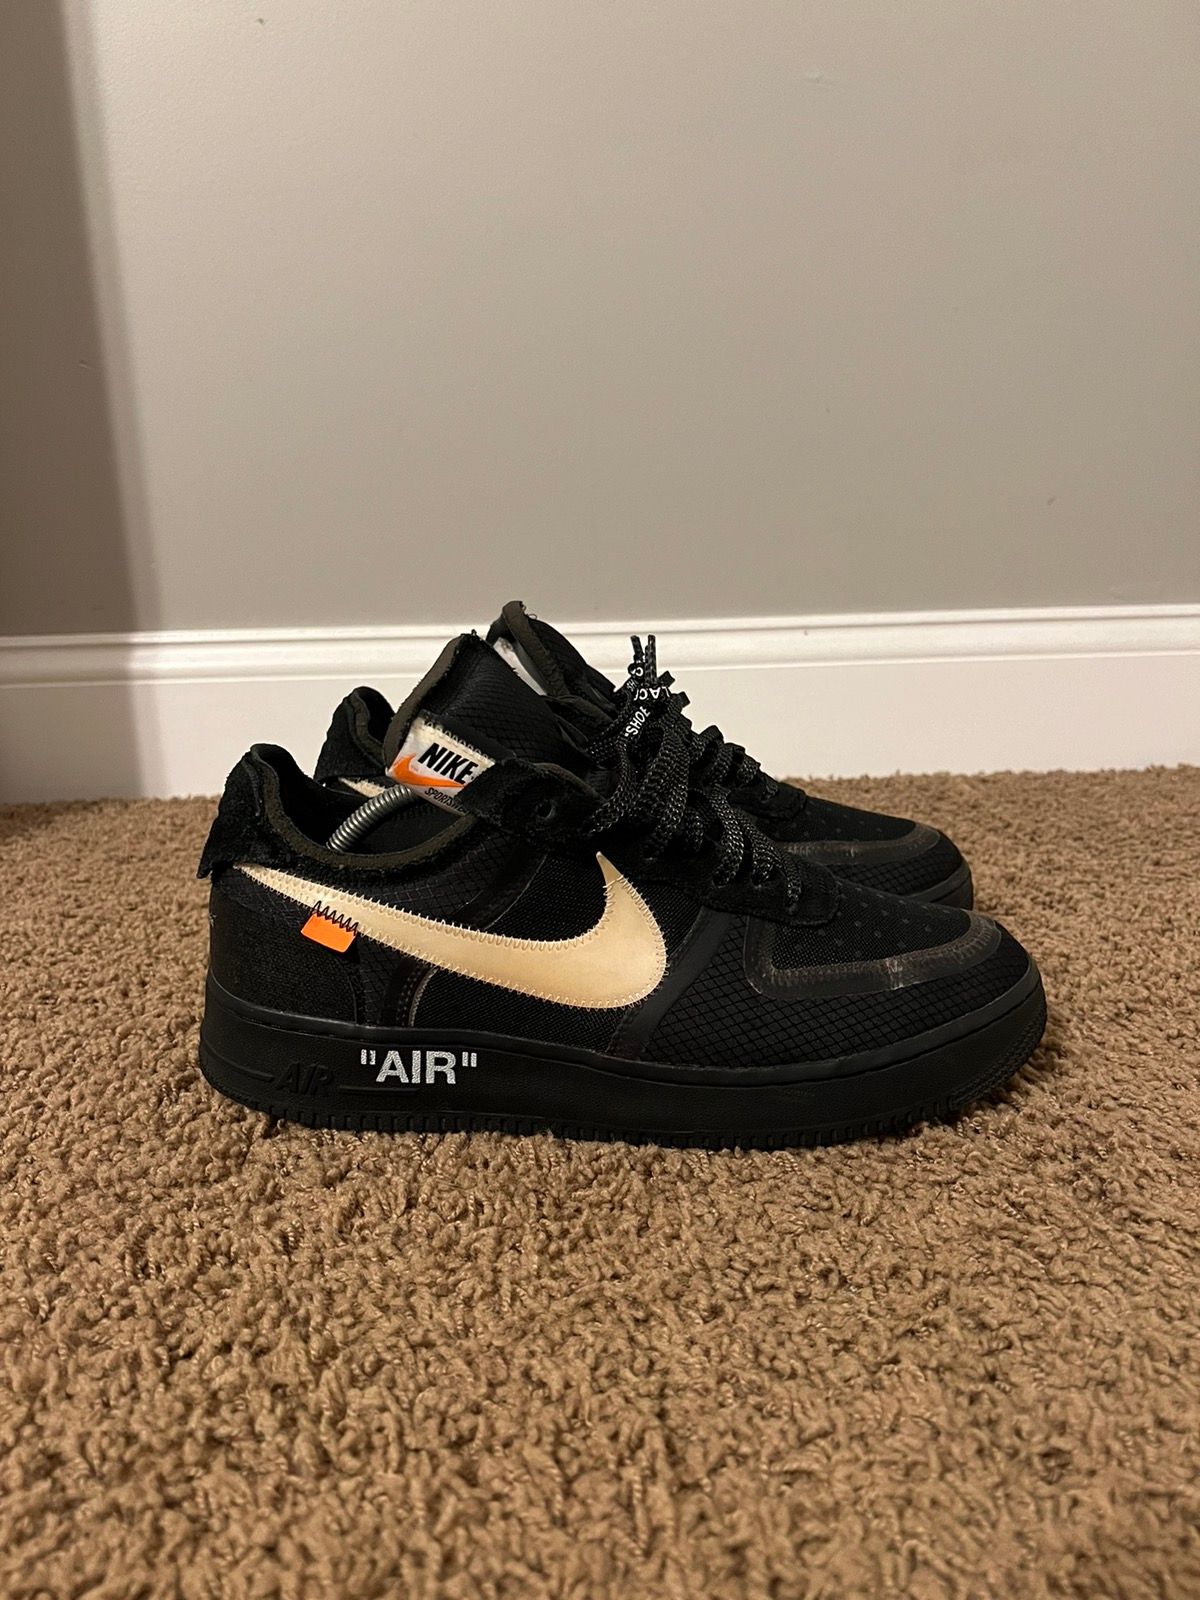 Pre-owned Nike X Off White Nike Air Force 1 Low Off White Black White Size 10.5 Shoes